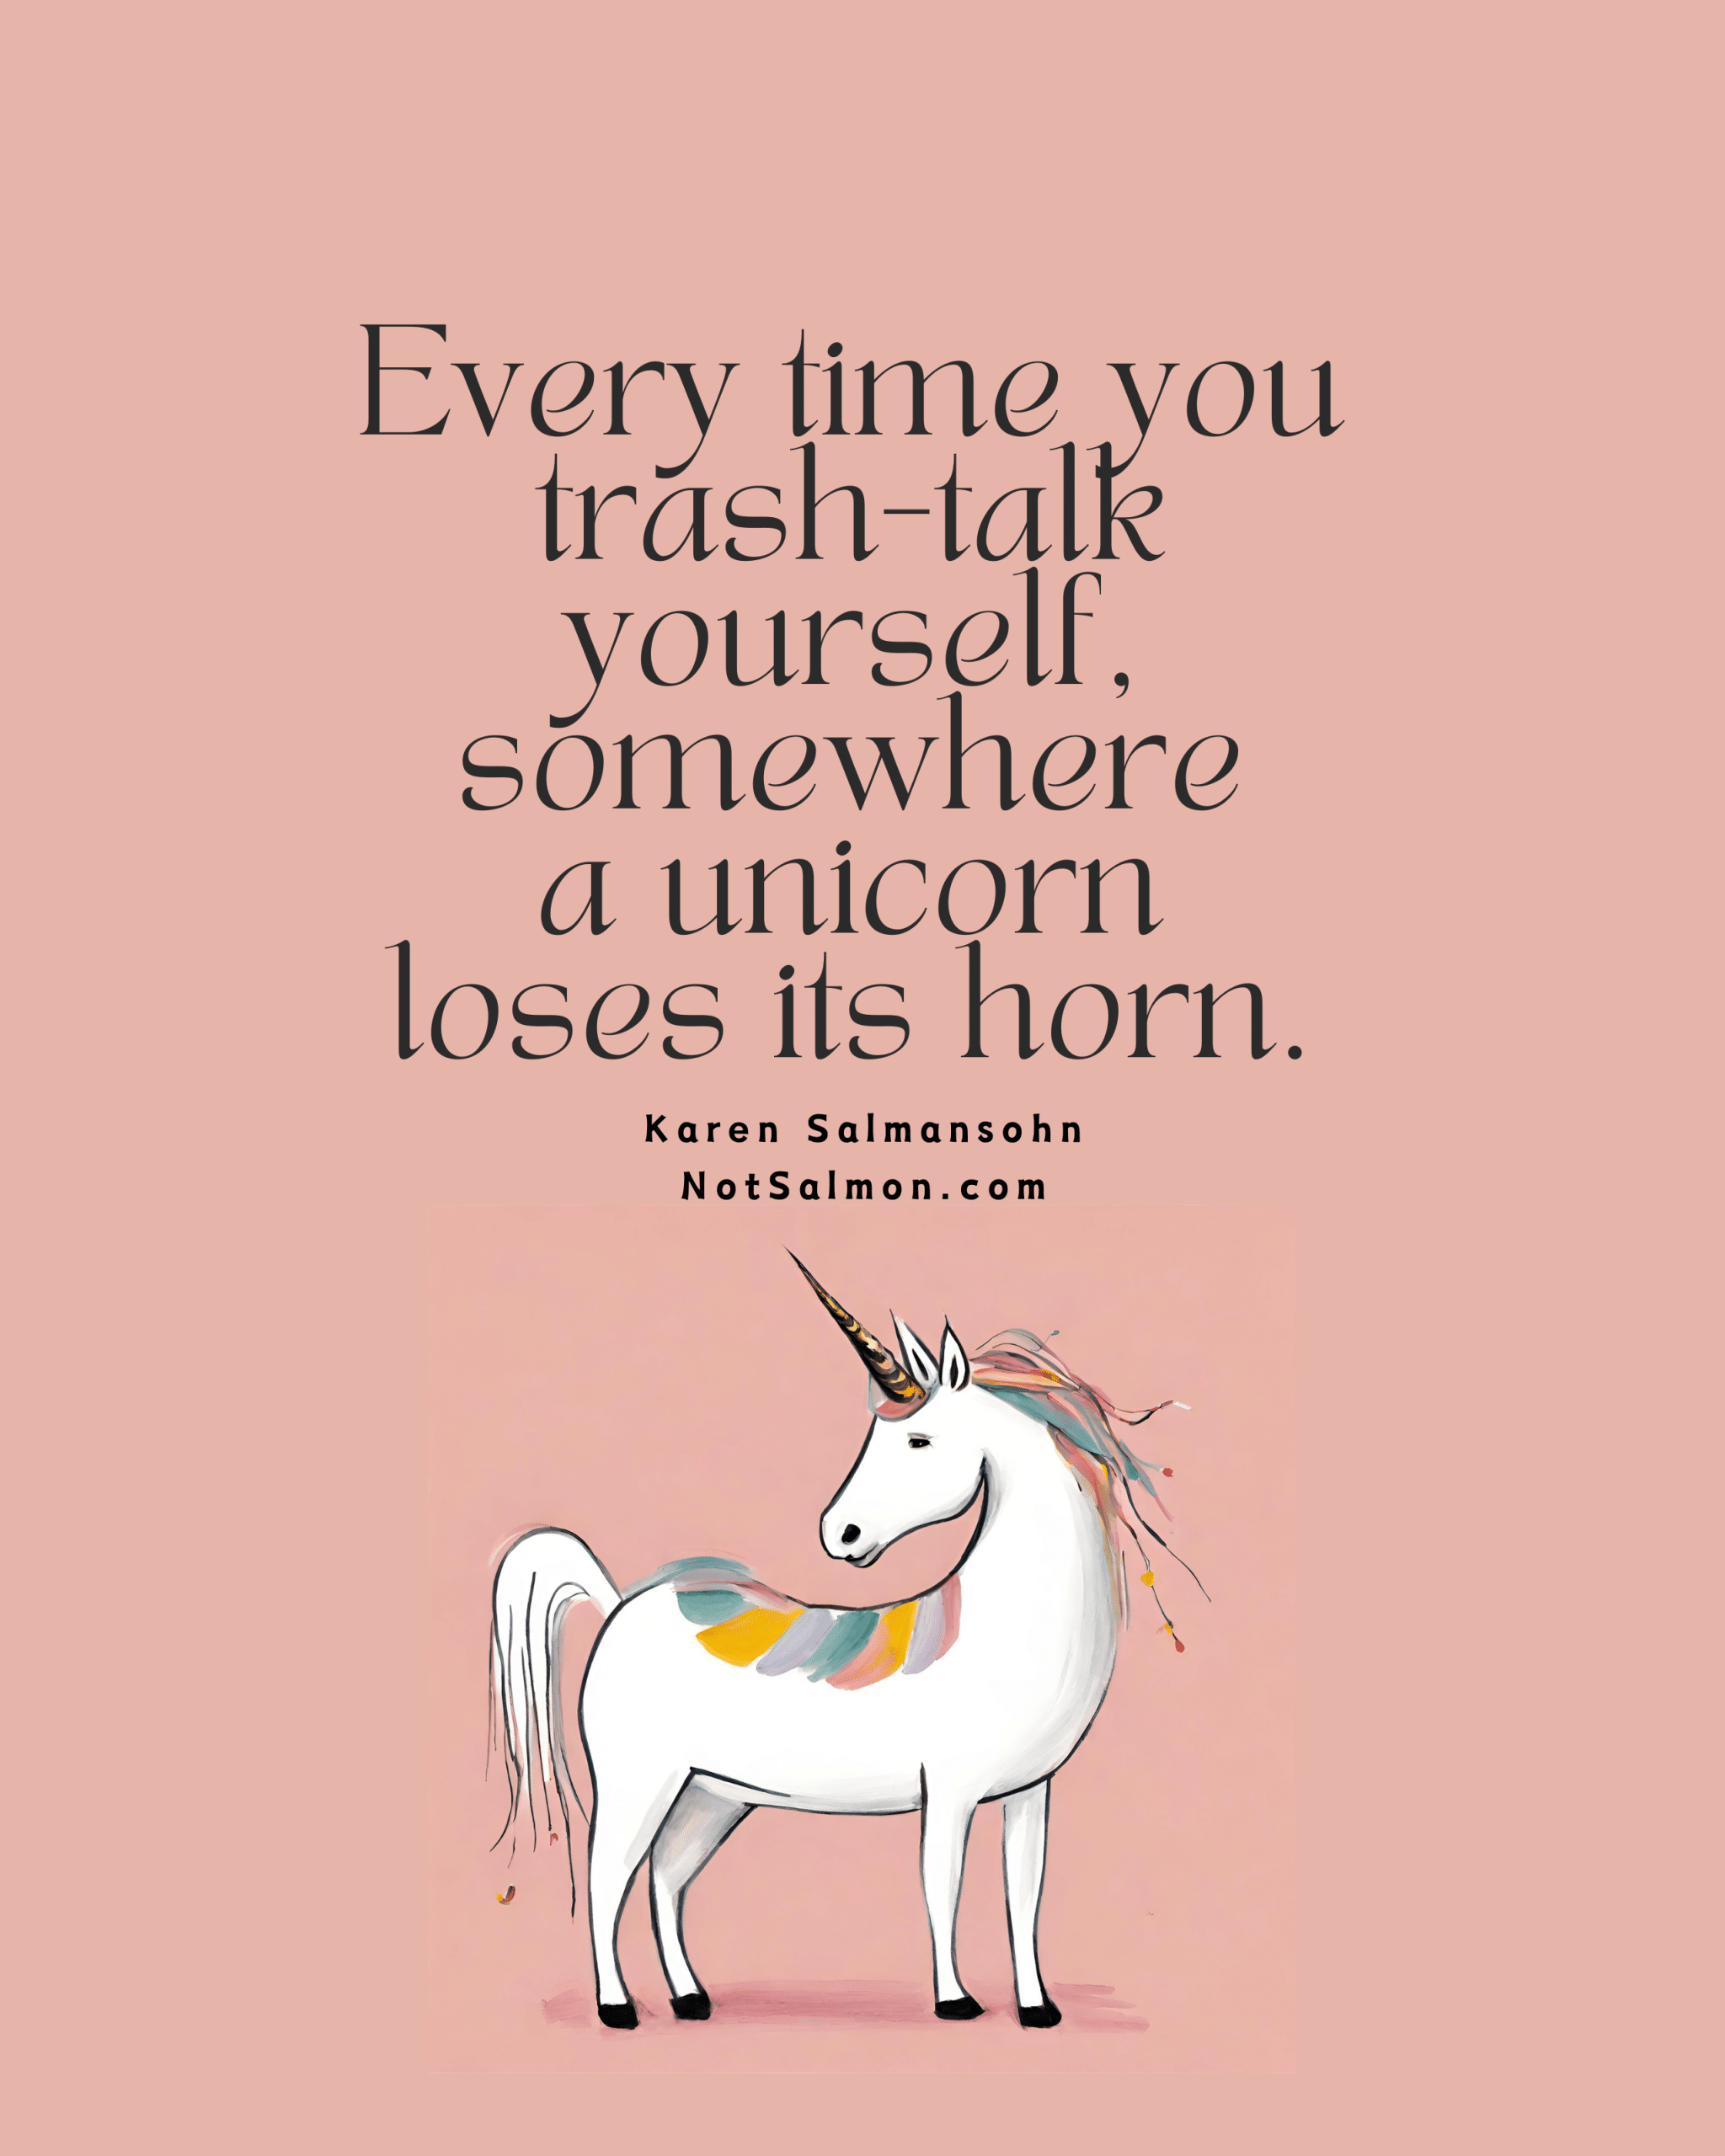 quote everytime you trash talk yourself somewhere a unicorn loses its horn - karen salmansohn